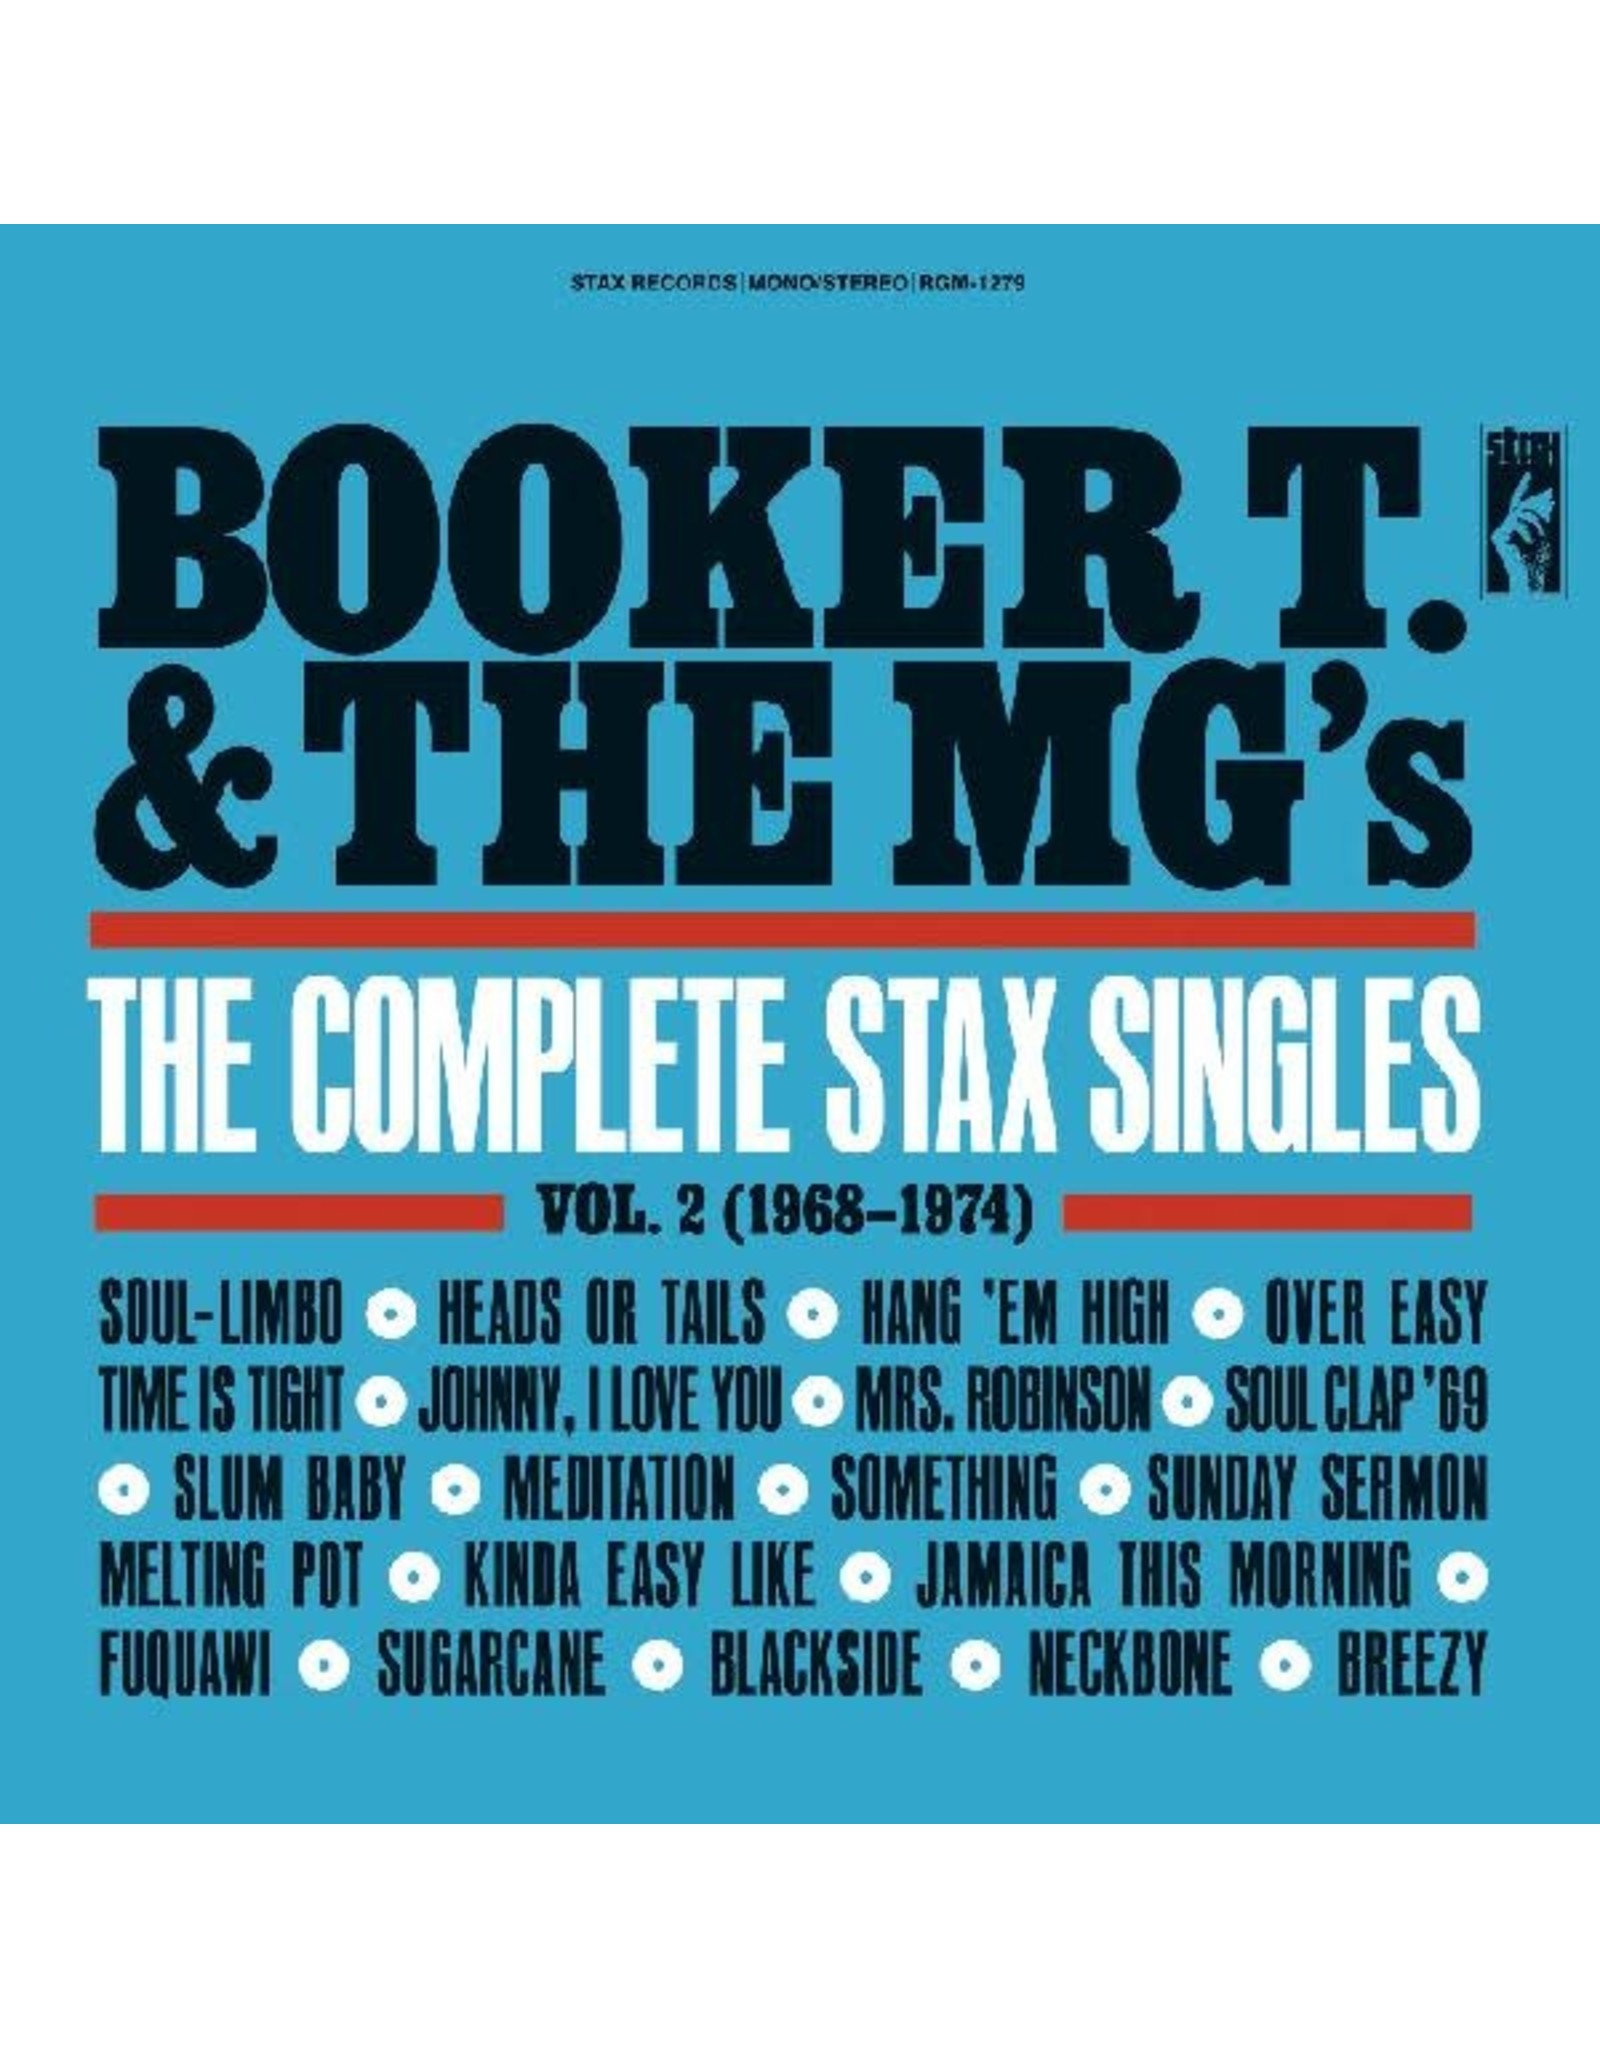 Real Gone Booker T. & the MG's: The Complete Stax Singles Vol. 2 (1968-1974) (2-LP, Red Vinyl) LP